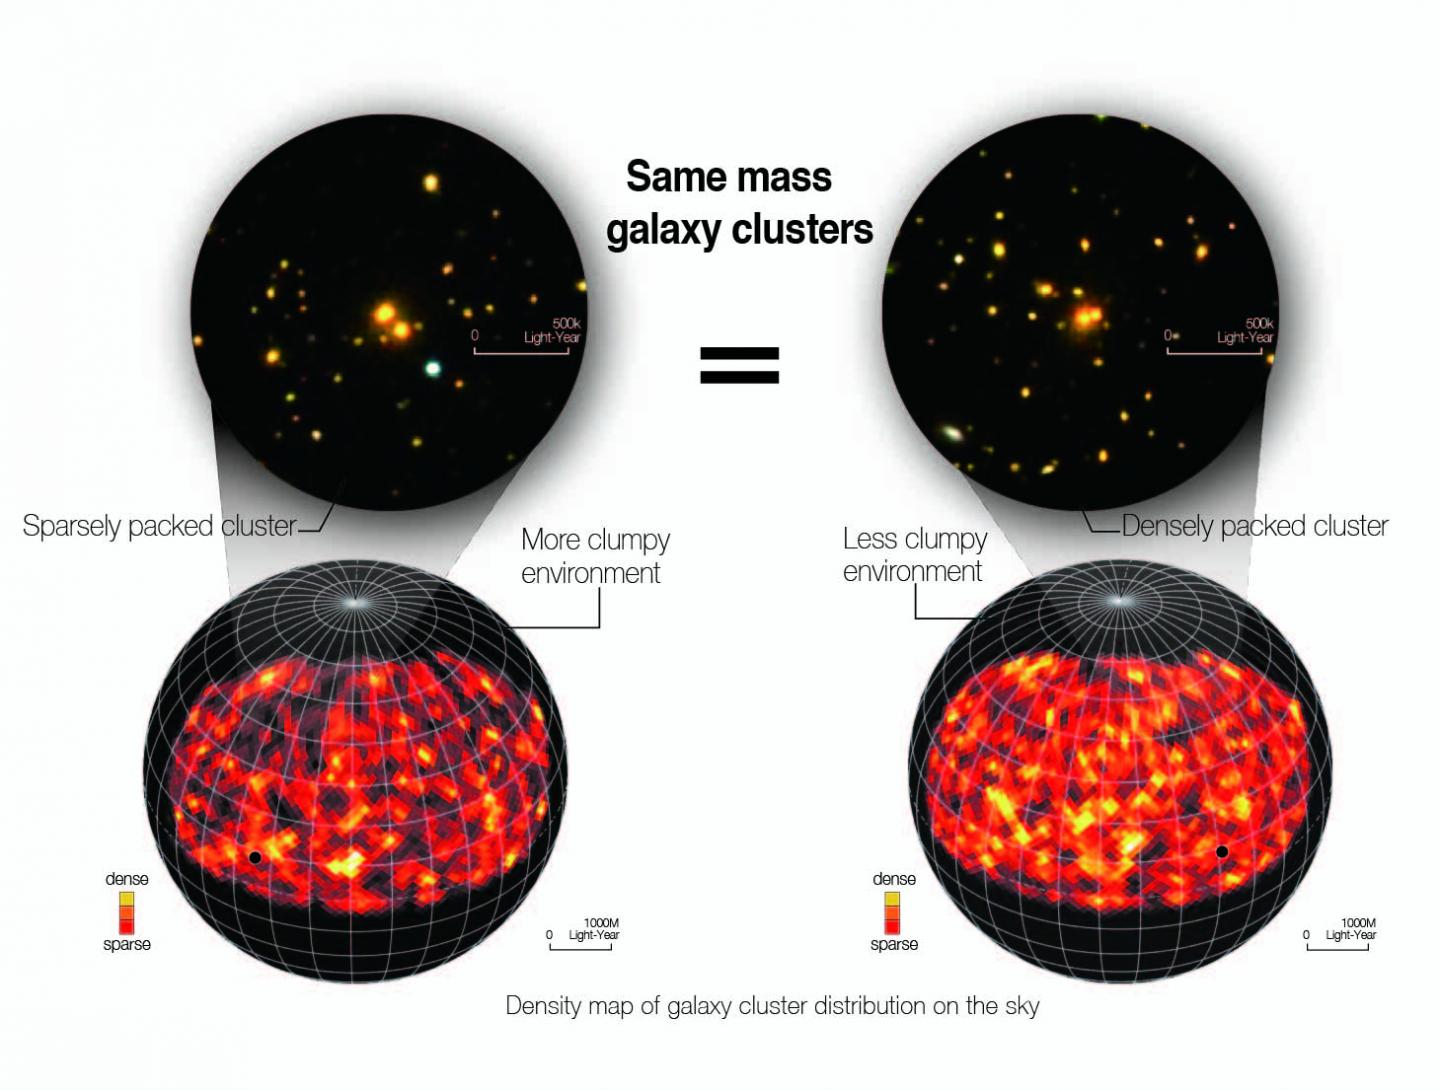 Assembly Bias in Galaxy Clusters of the Same Mass